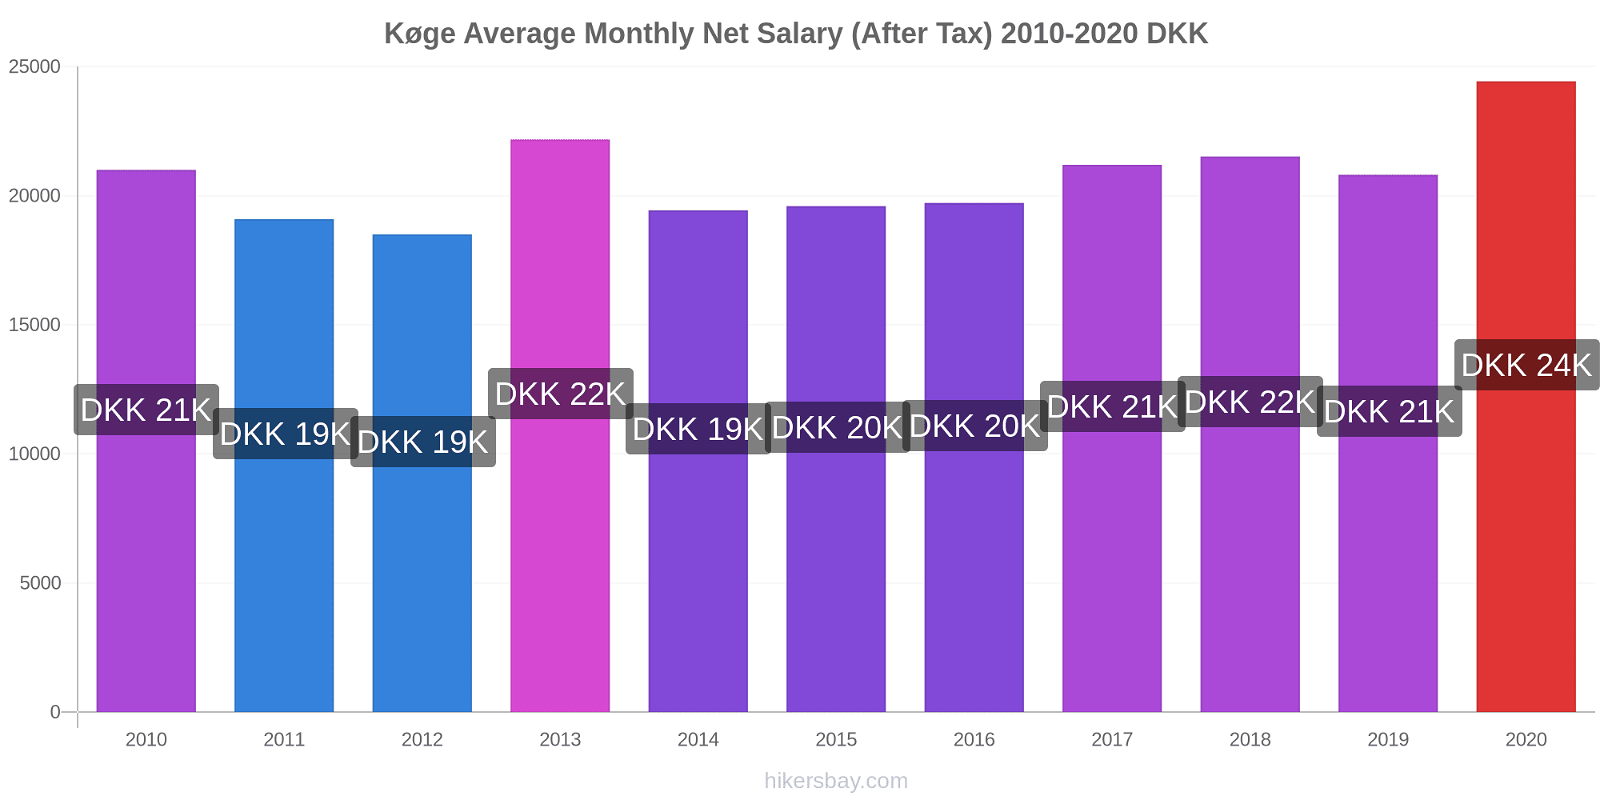 Køge price changes Average Monthly Net Salary (After Tax) hikersbay.com